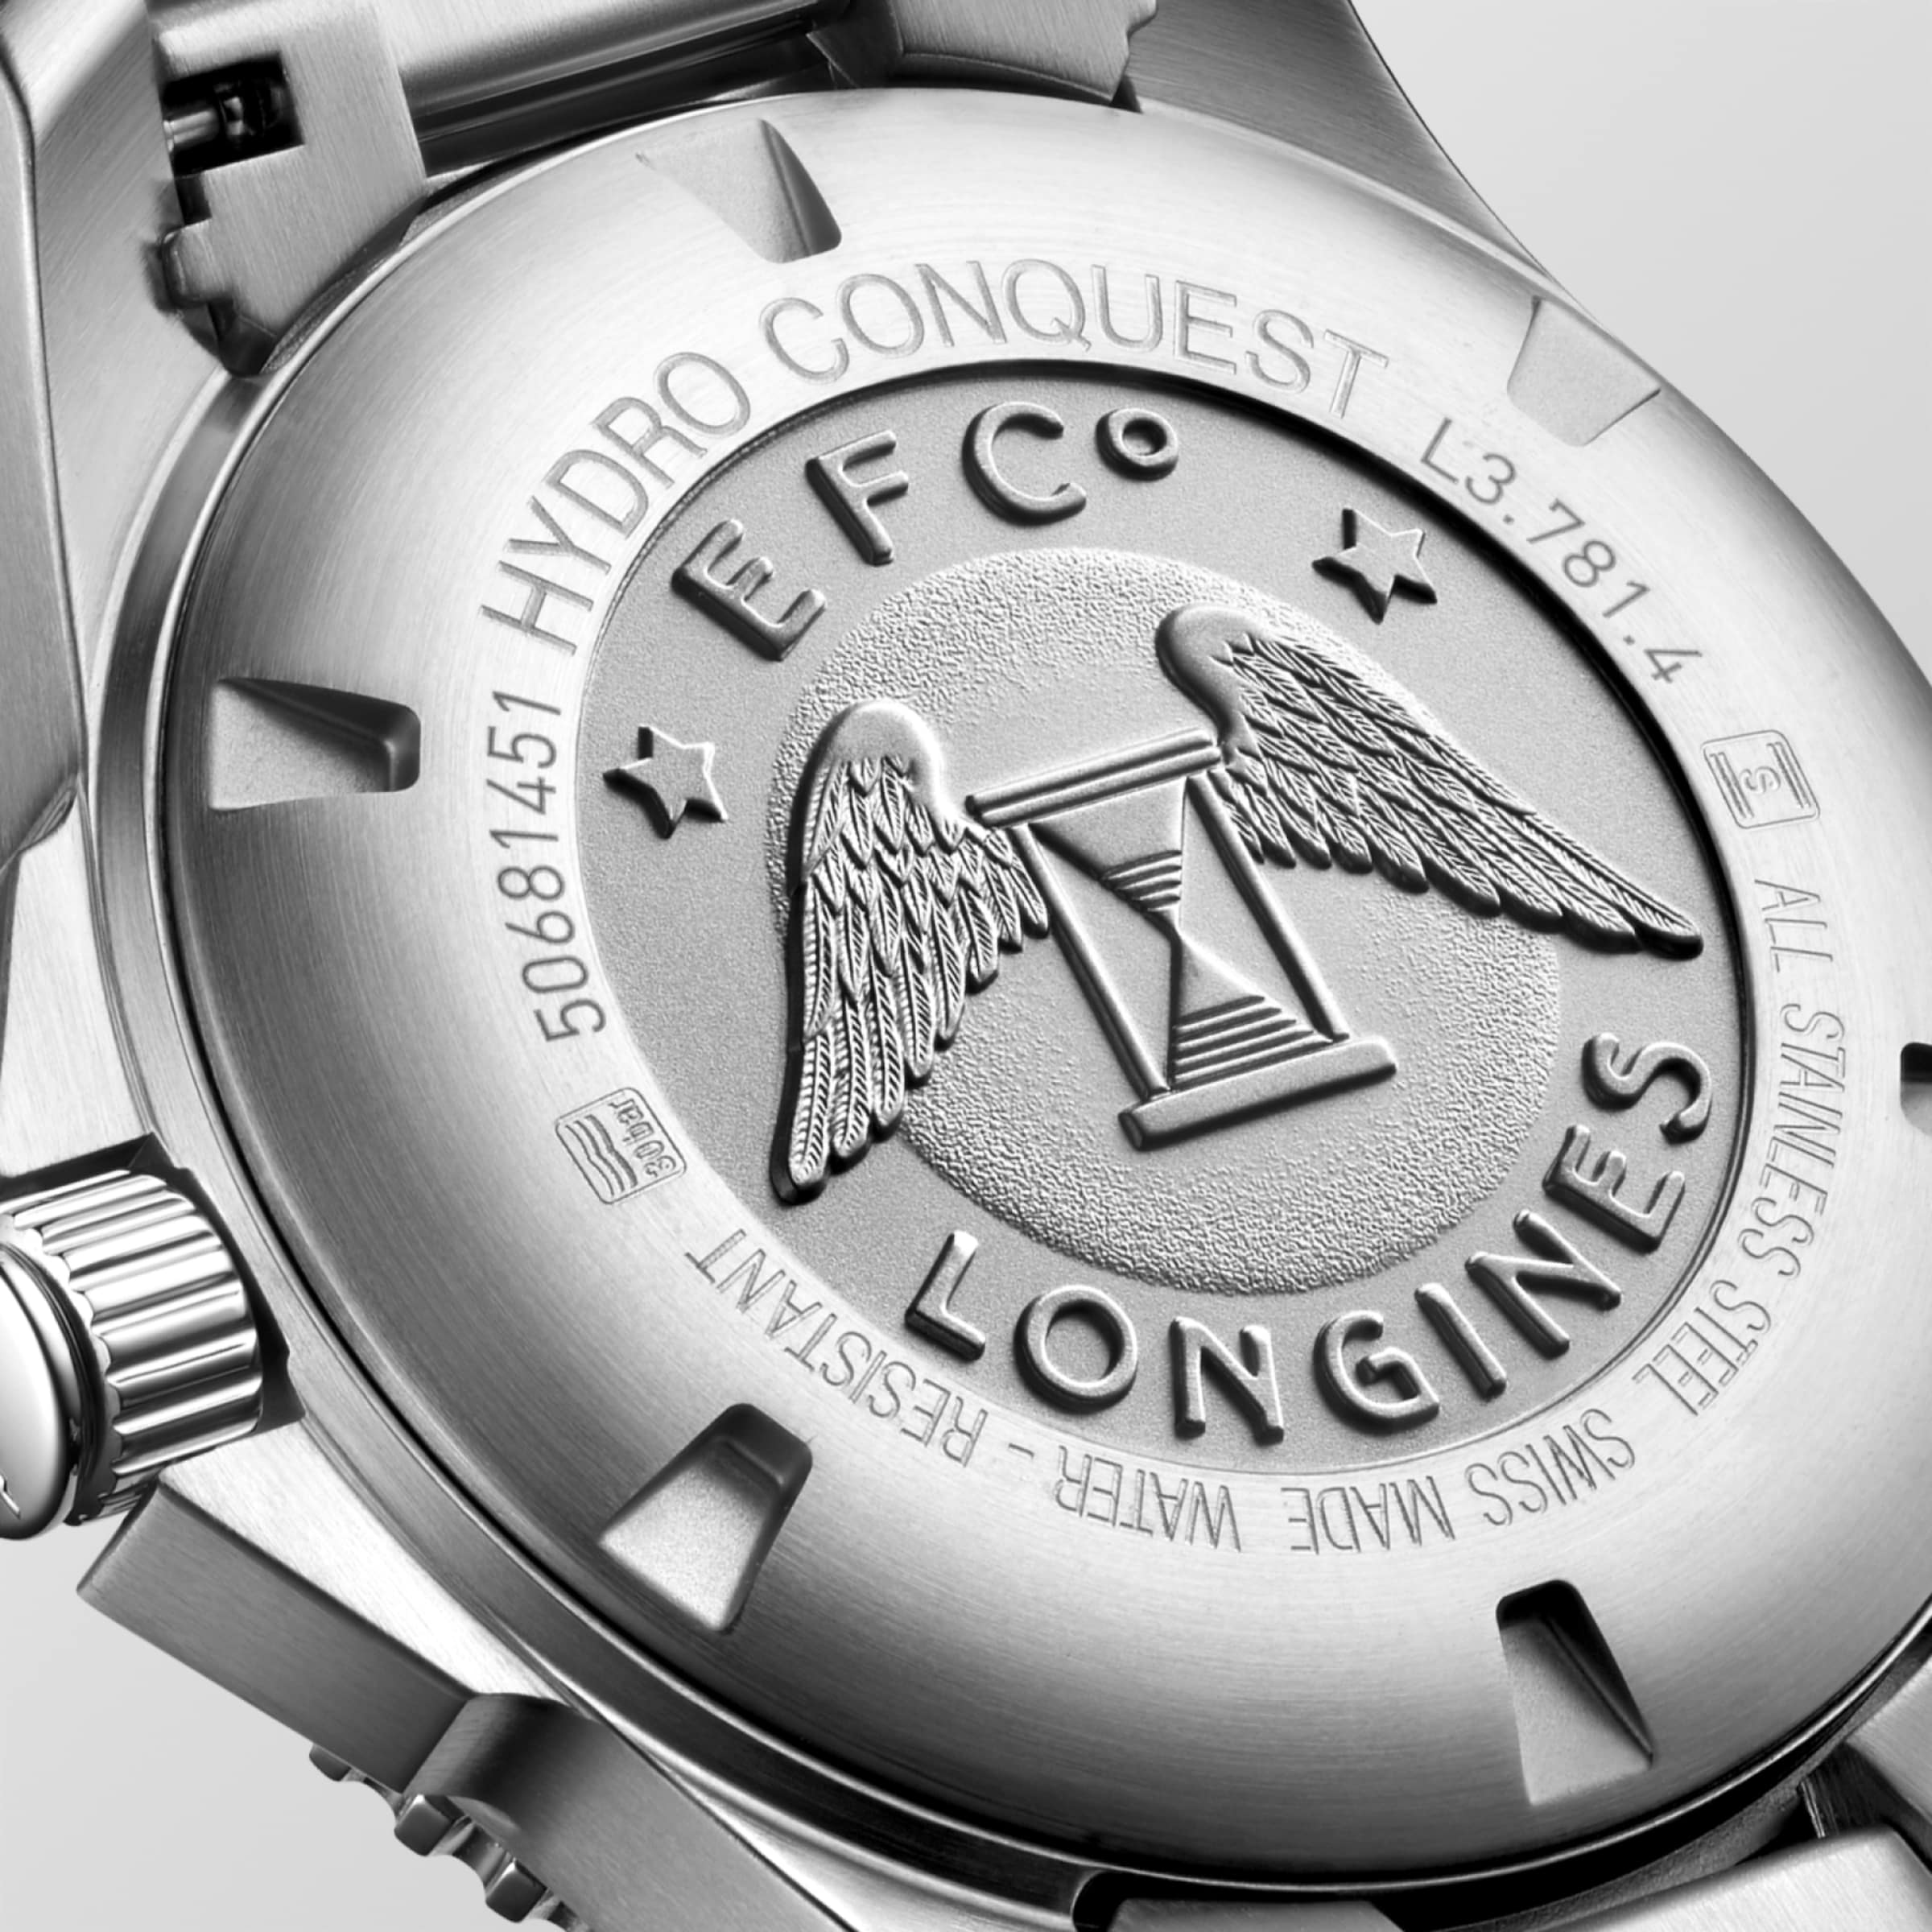 Longines HYDROCONQUEST Automatic Stainless steel and ceramic bezel Watch - L3.781.4.96.6